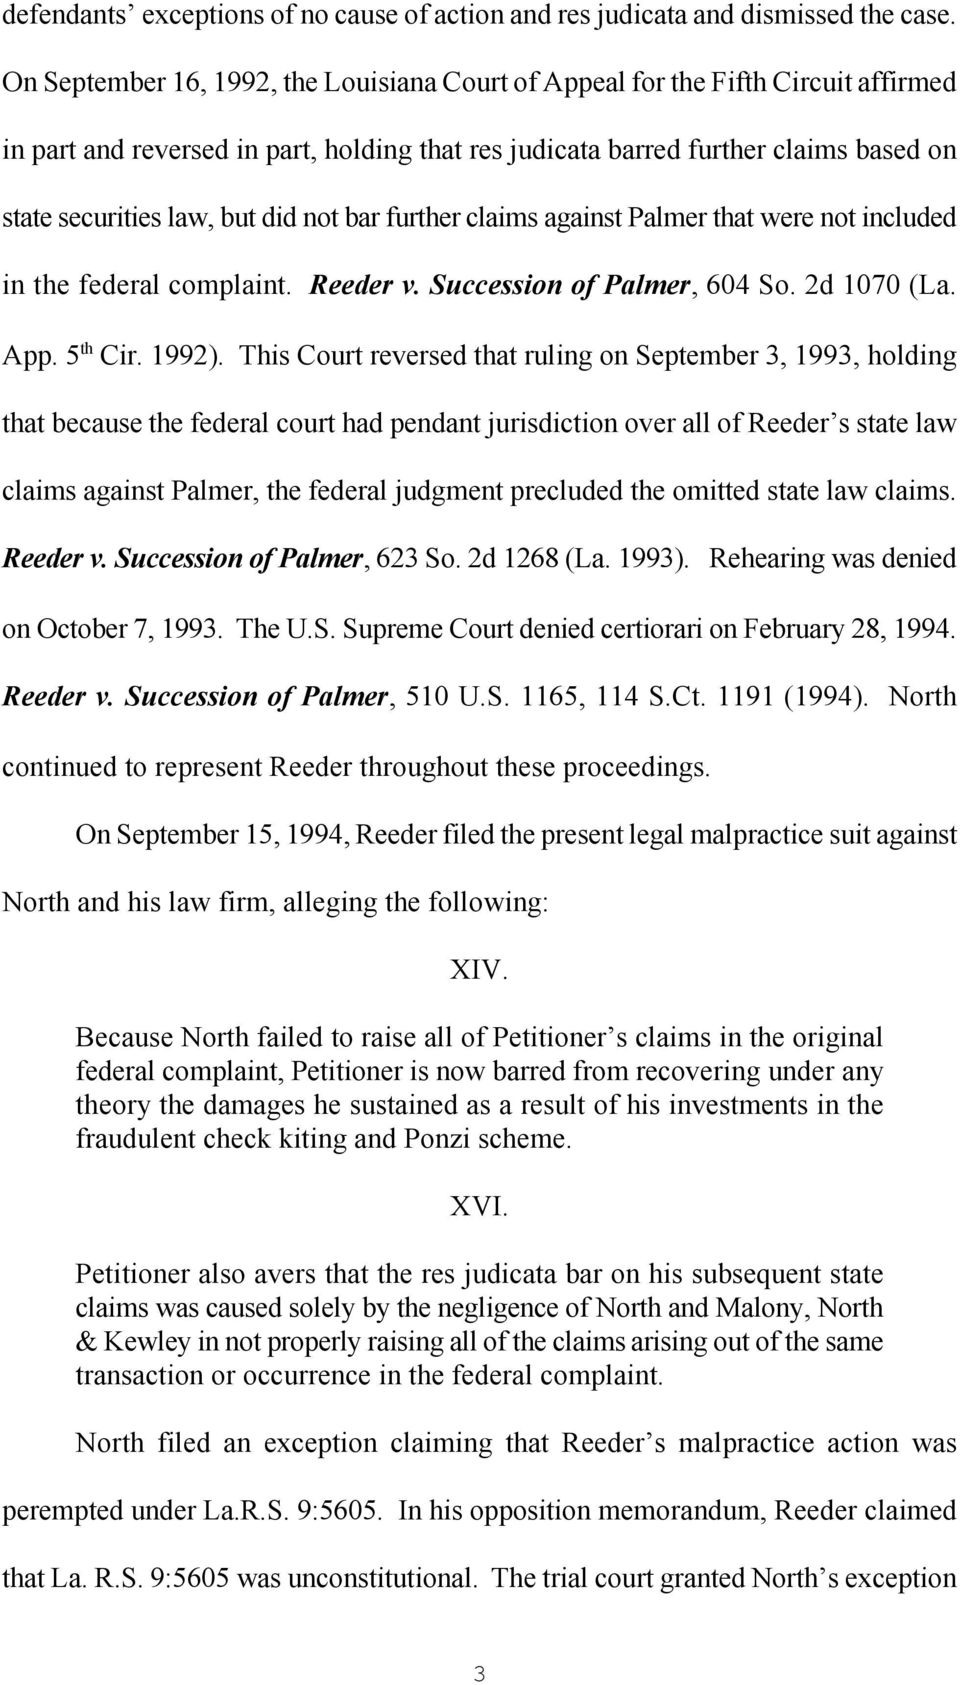 did not bar further claims against Palmer that were not included in the federal complaint. Reeder v. Succession of Palmer, 604 So. 2d 1070 (La. th App. 5 Cir. 1992).